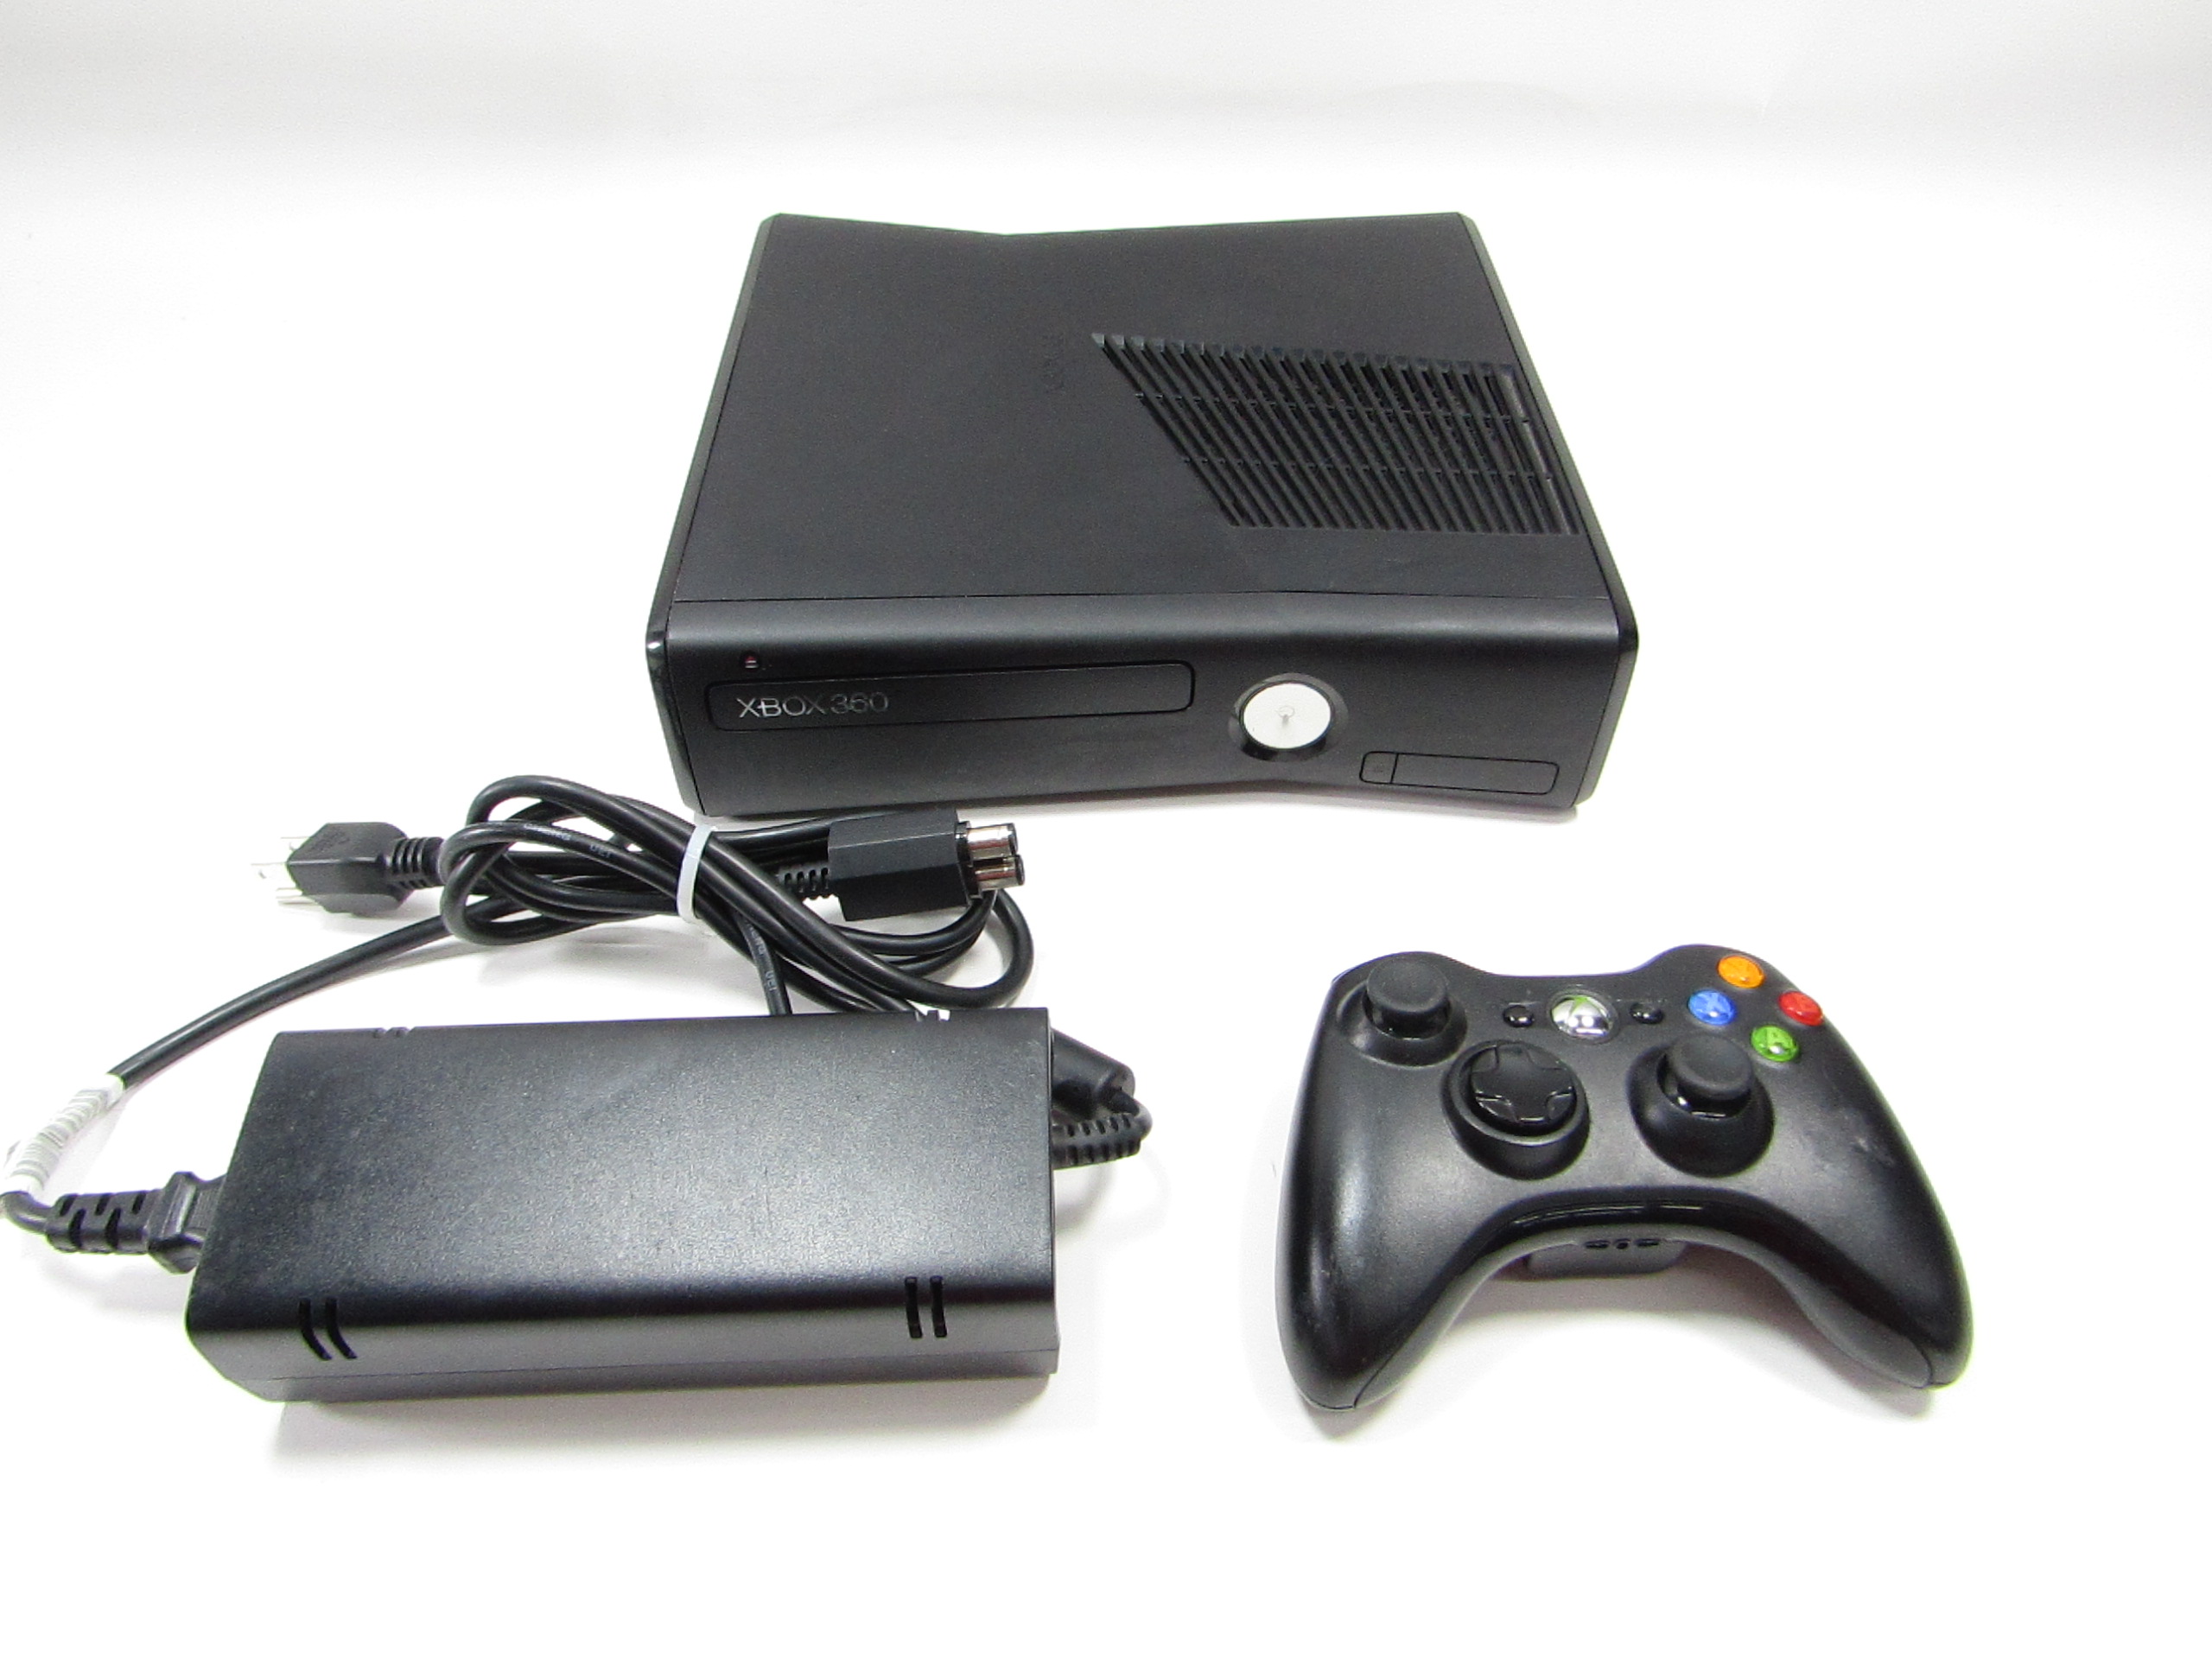  Xbox 360 Wireless Controller - Glossy Black : Video Games